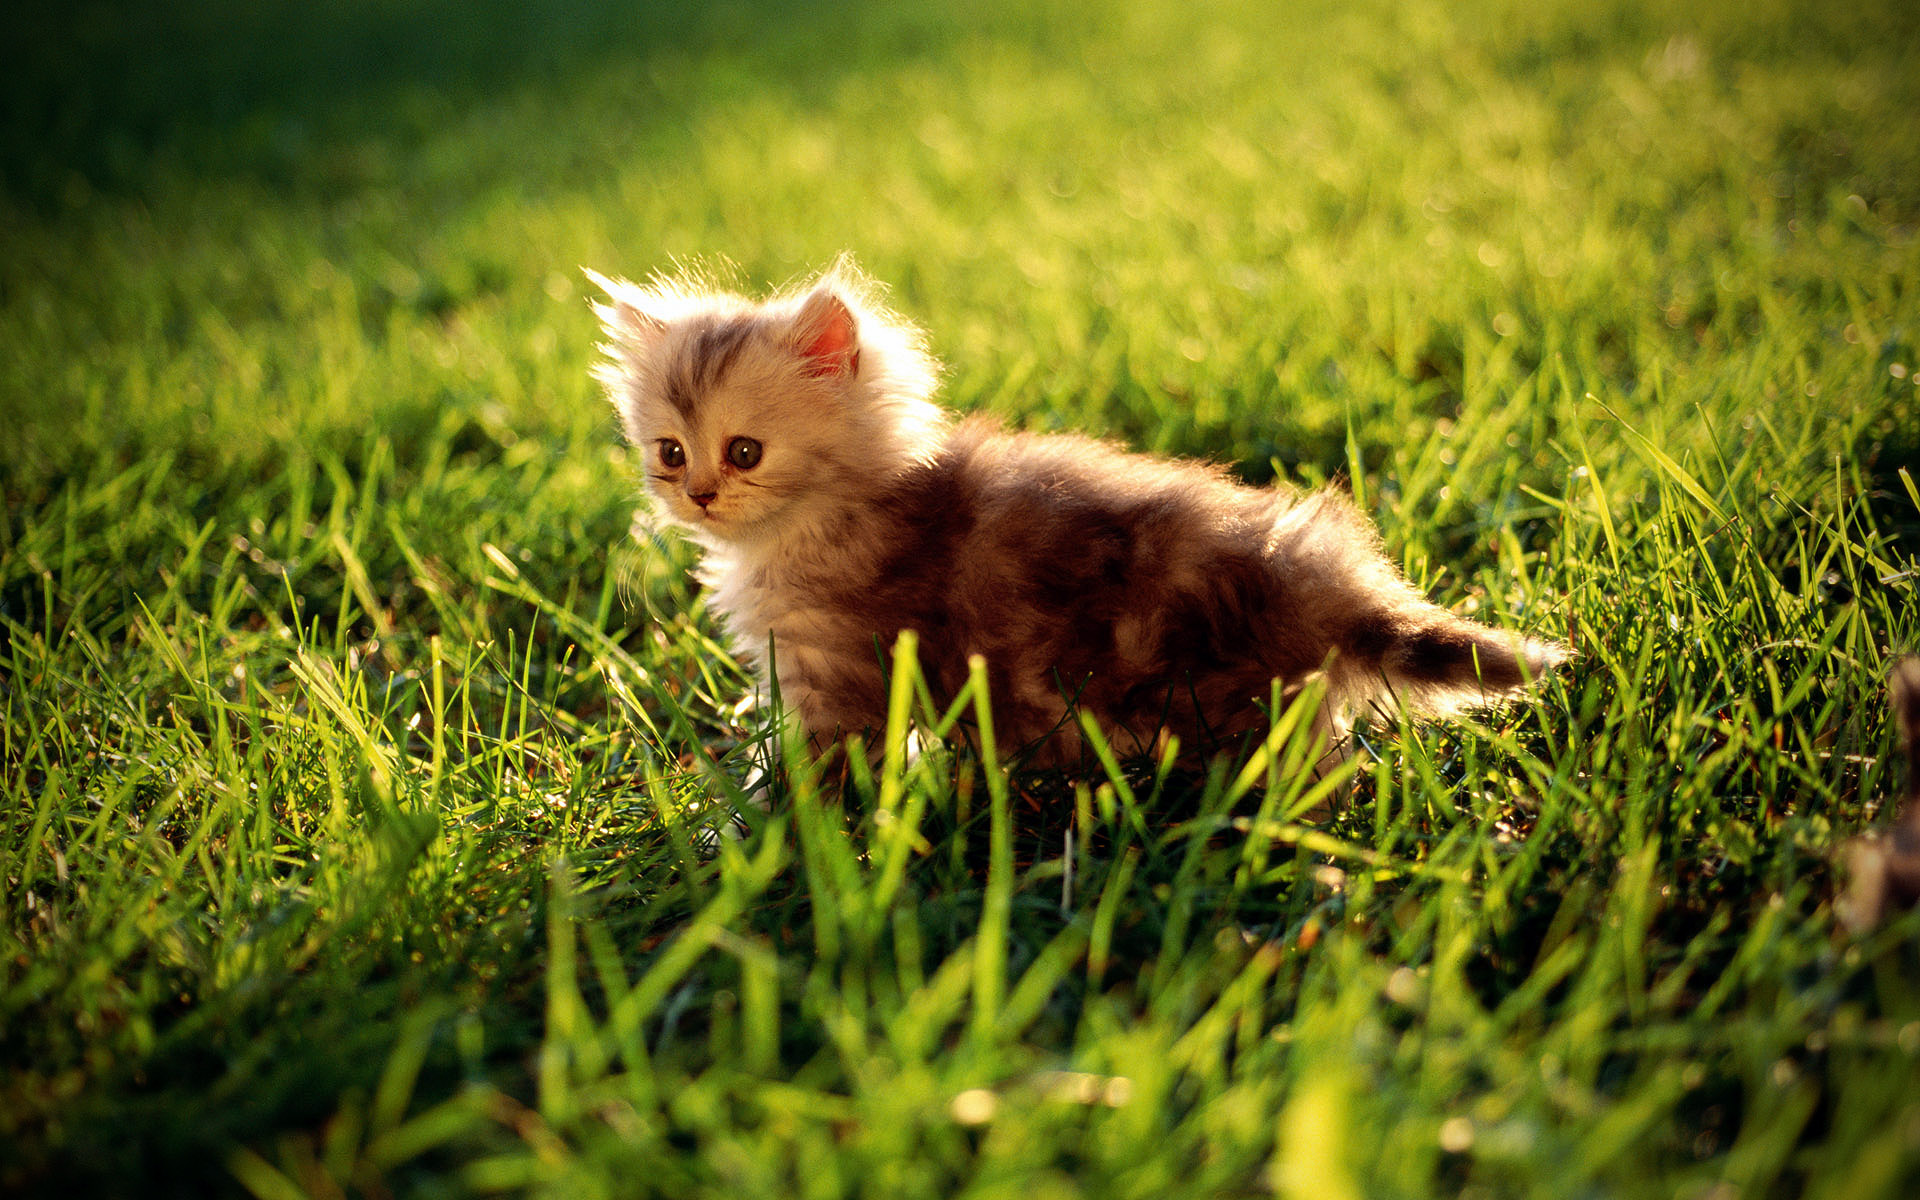 Cat, Cute, And Kitten Image - Pretty Pictures Of Grass - HD Wallpaper 